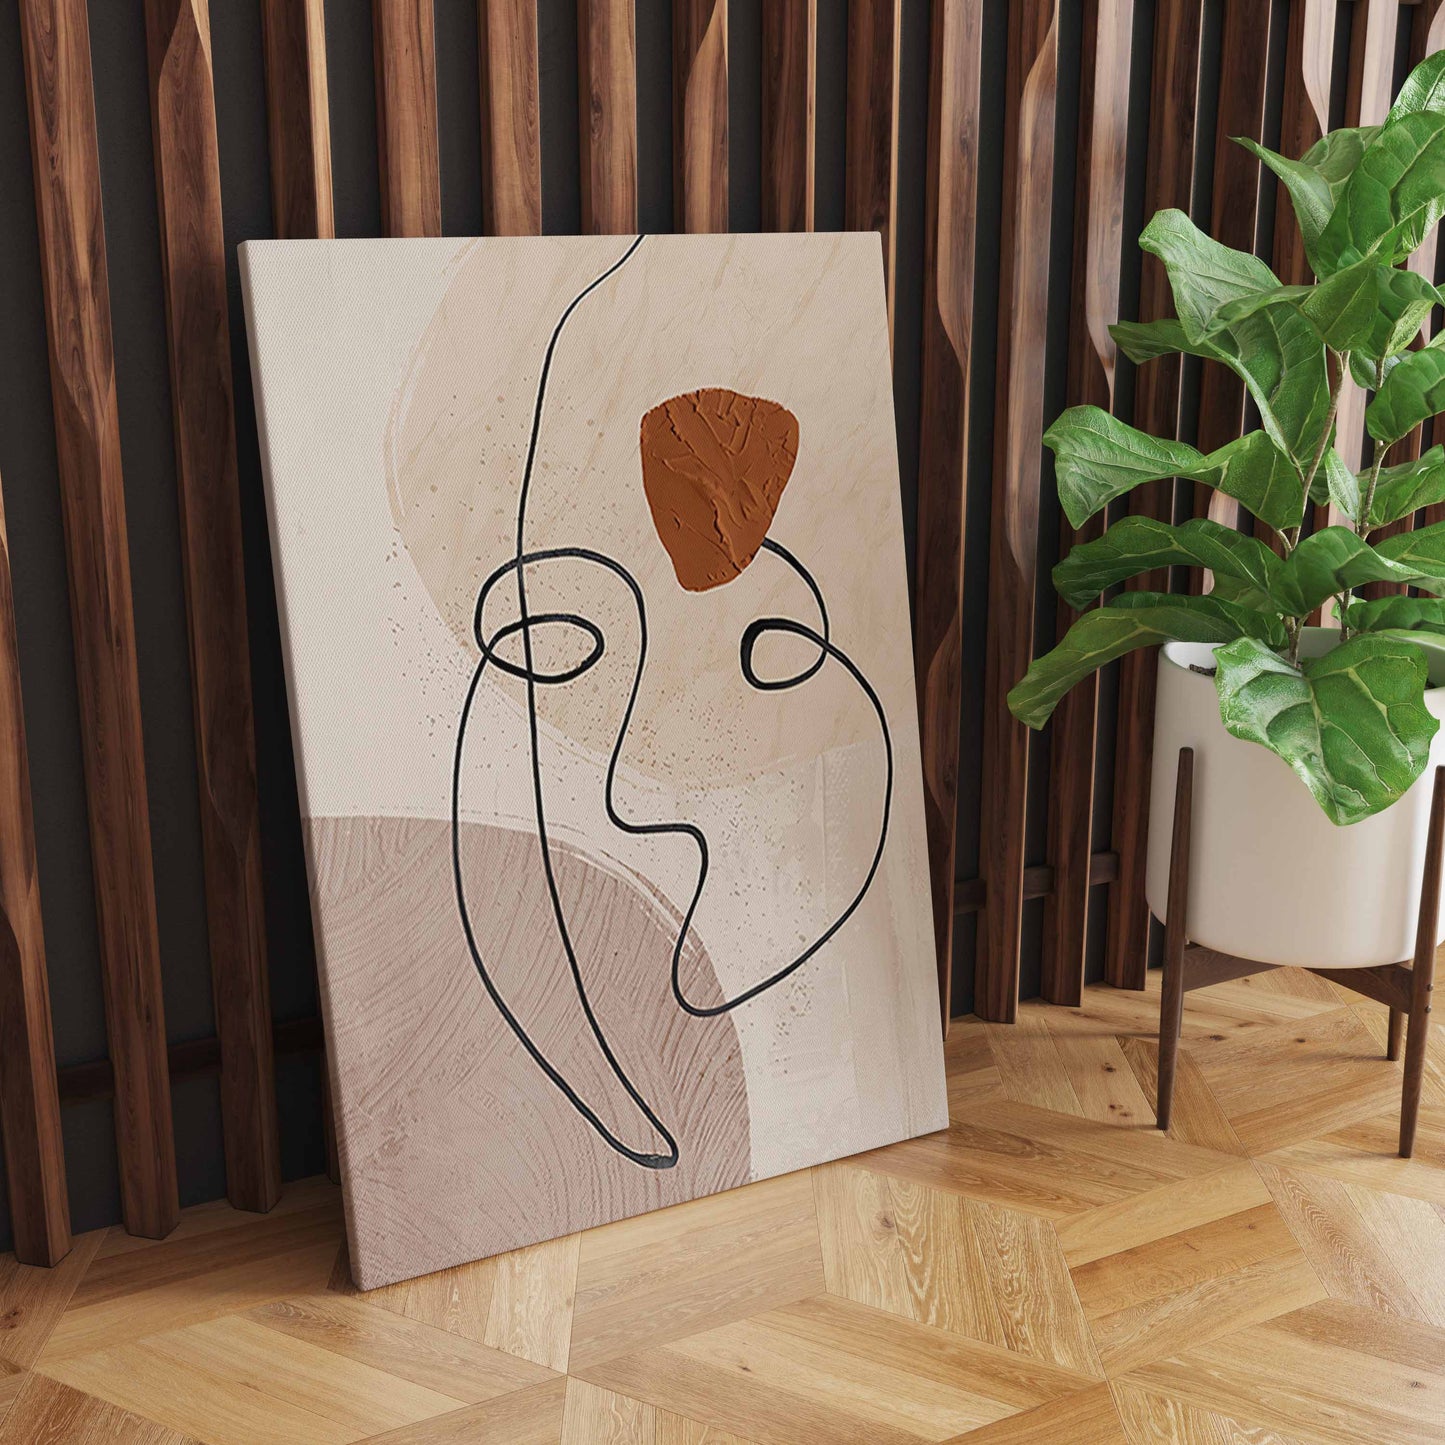 Captivating Abstract Matisse Face Line Art Wall Design - Nordic Color Block Living Room Home Decor S04E32